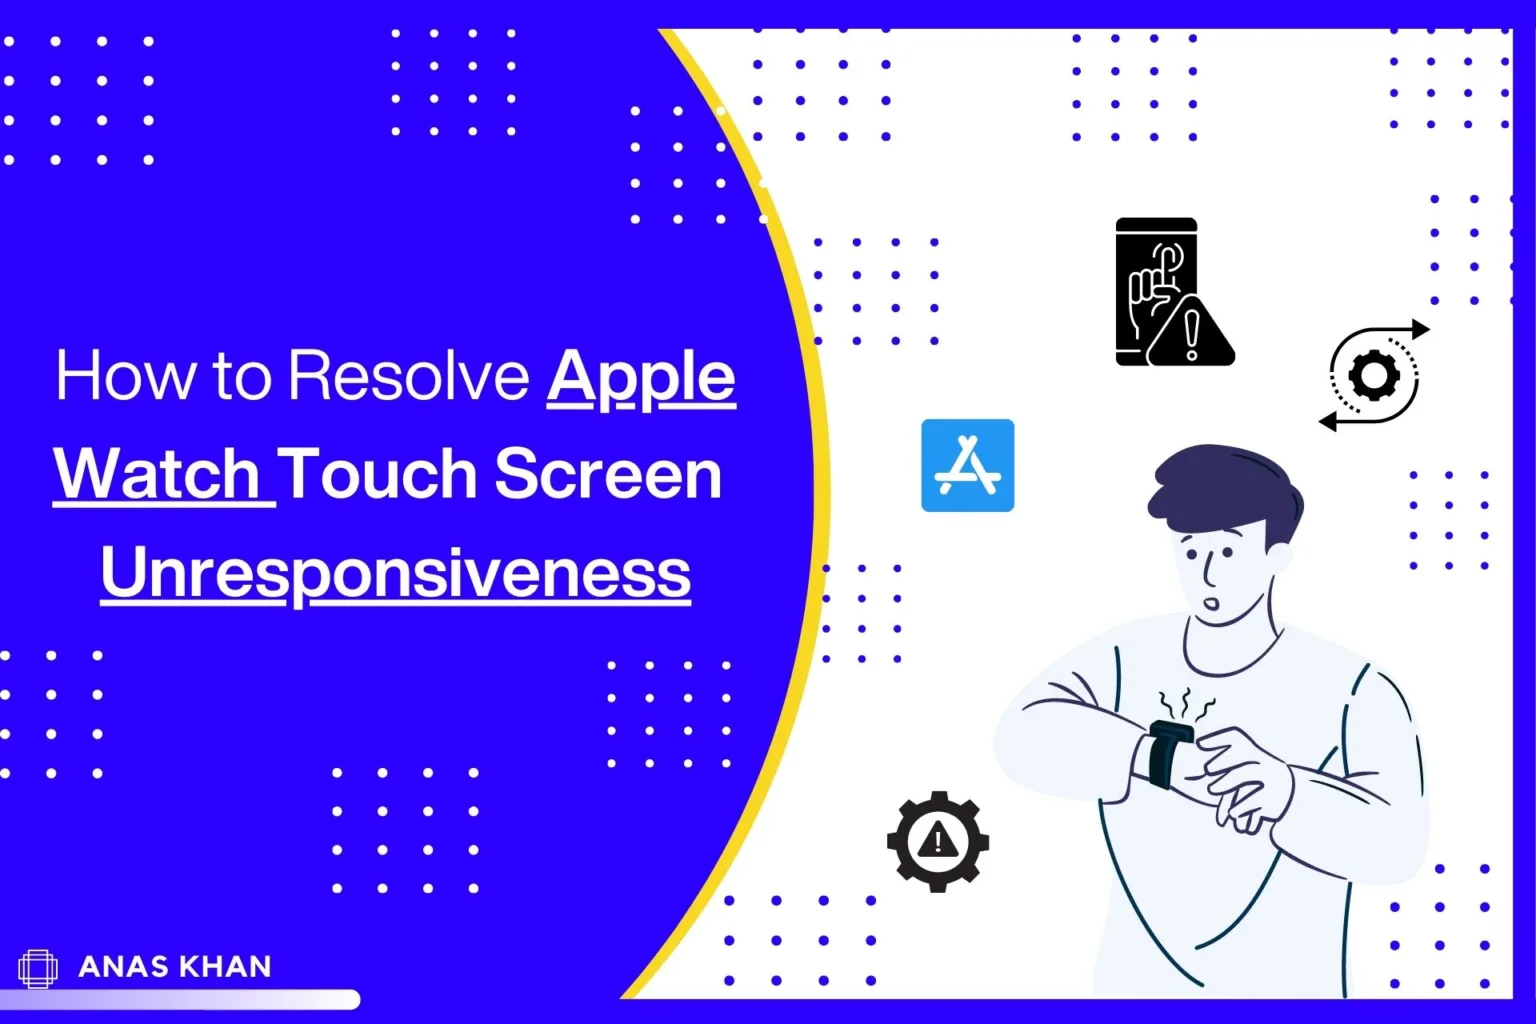 How to Resolve Apple Watch Touch Screen Unresponsiveness